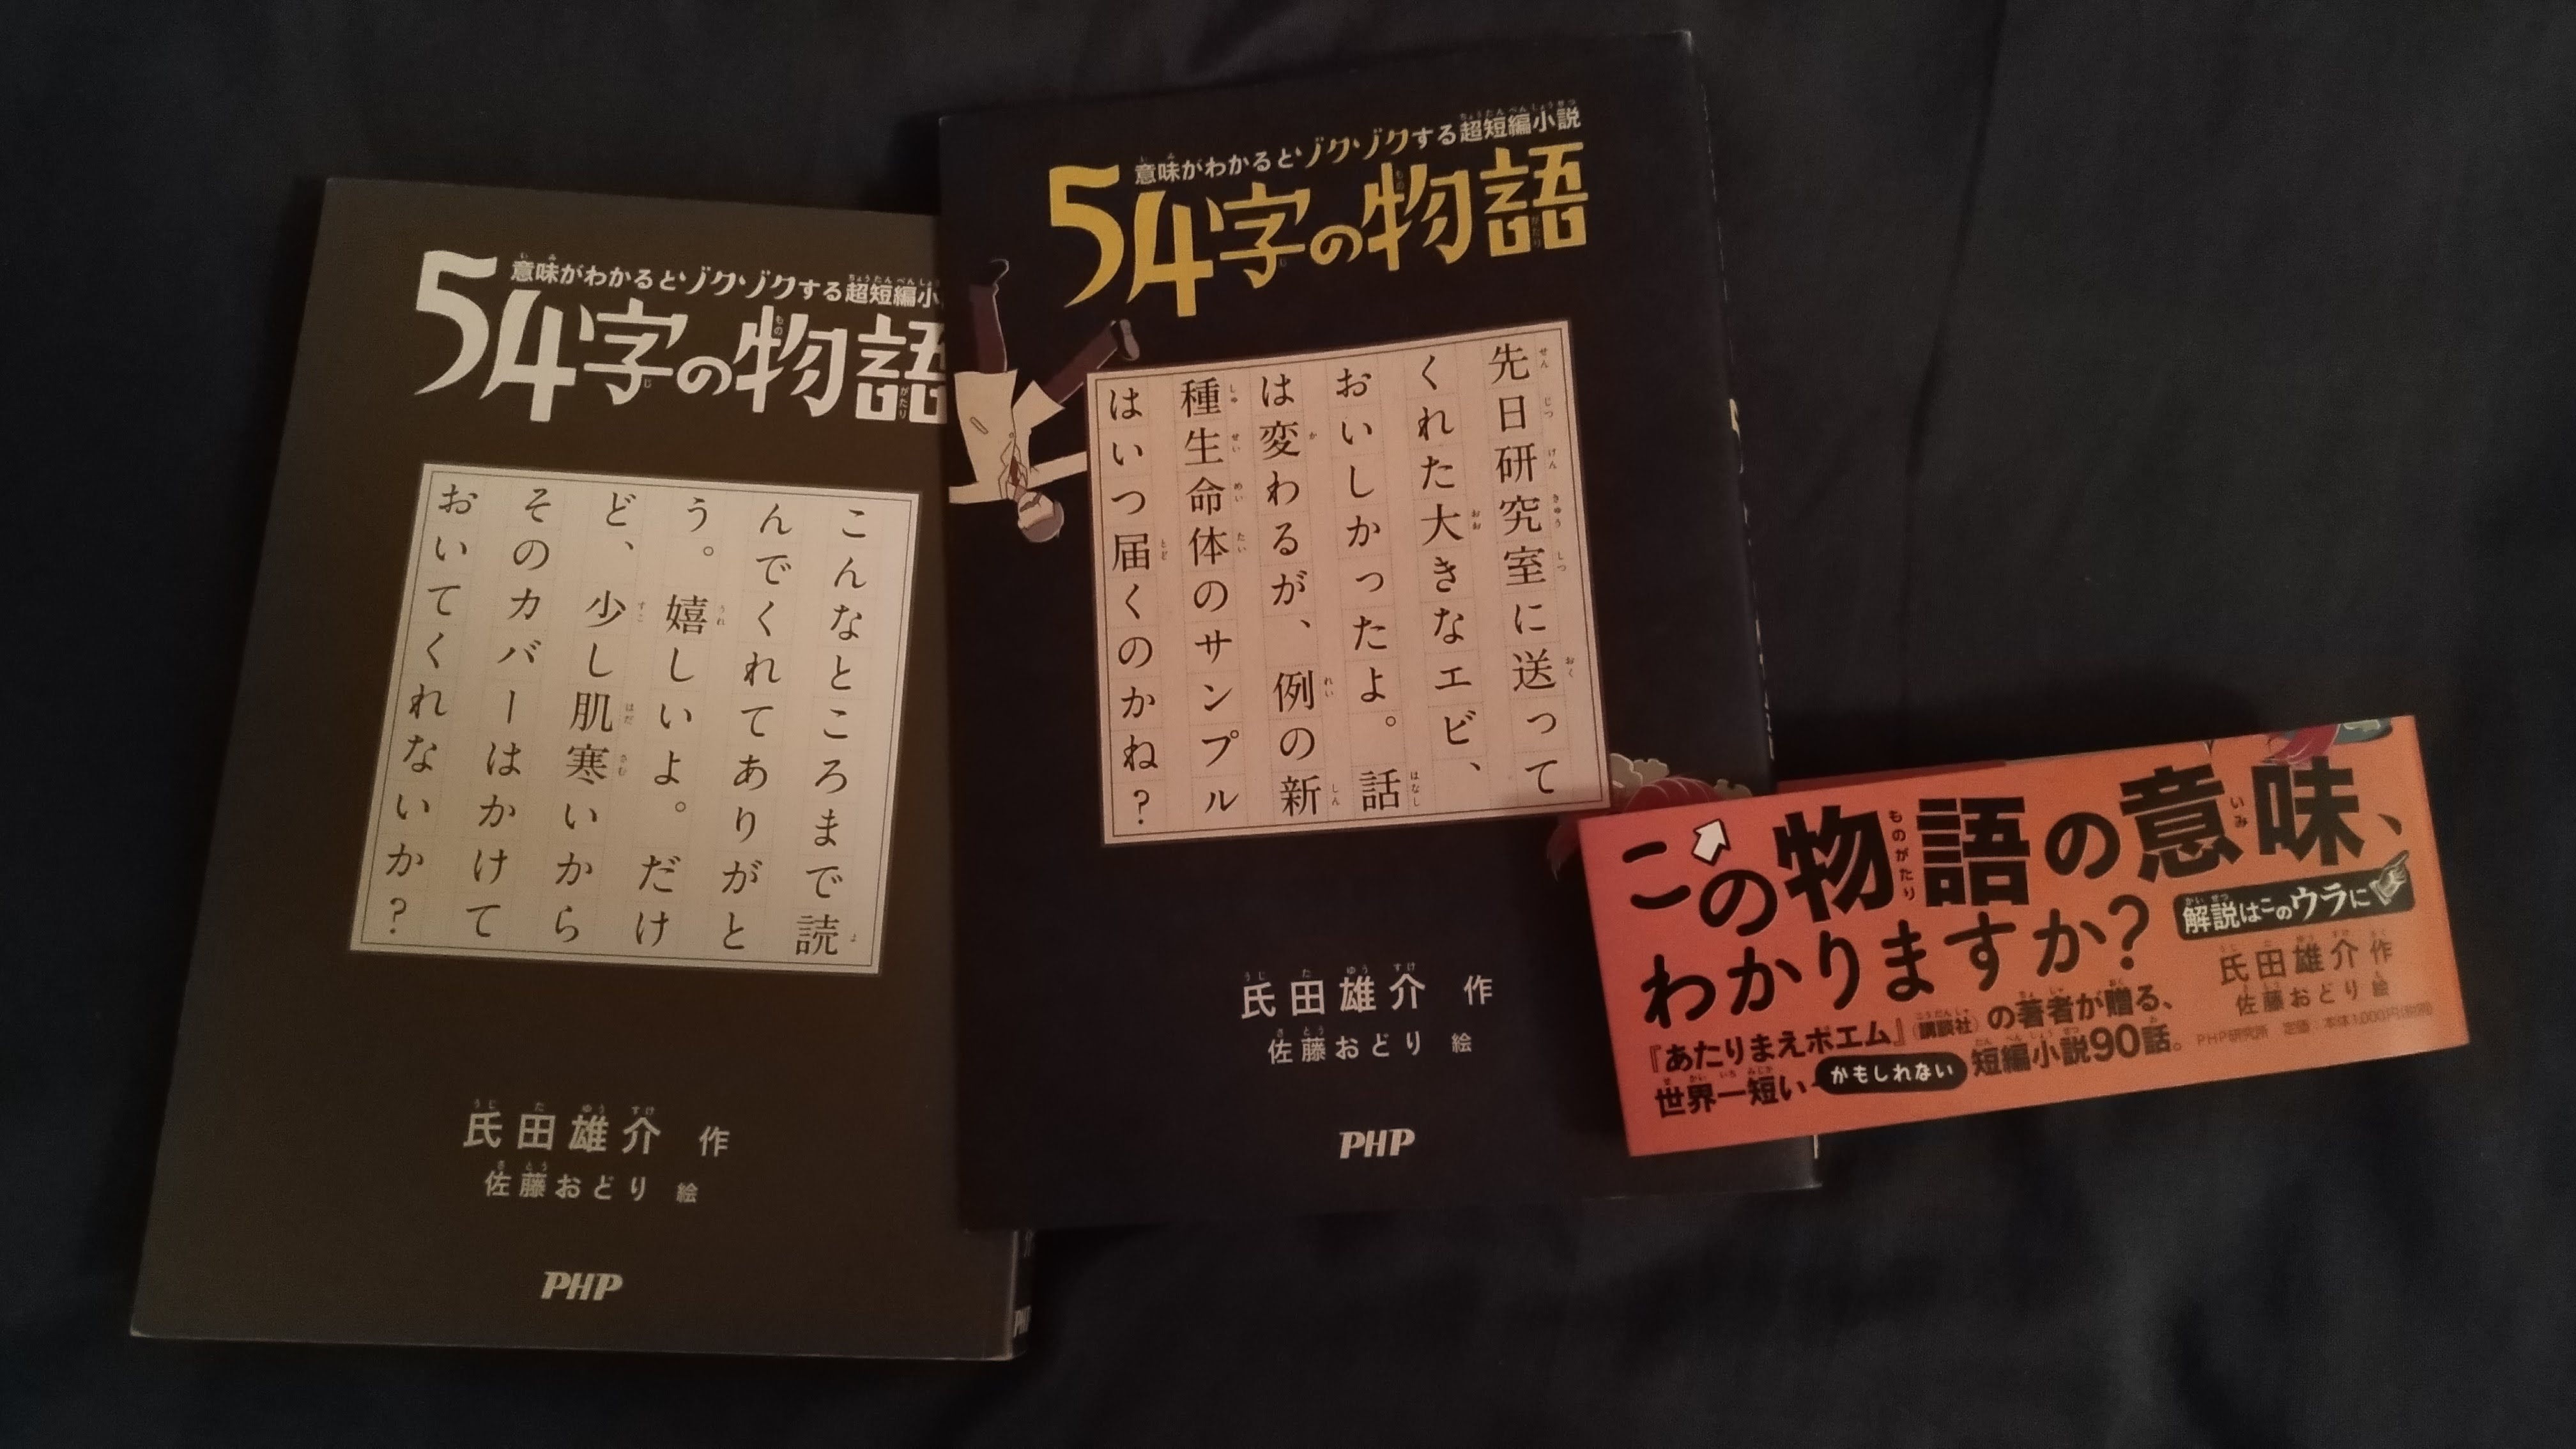 Belly-band and dust cover next to the gray cover showing a short story: こんなところまで読んでくれてありがとう。嬉しいよ。だけど、少し肌寒いからそのカバーはかけておいてくれないか？